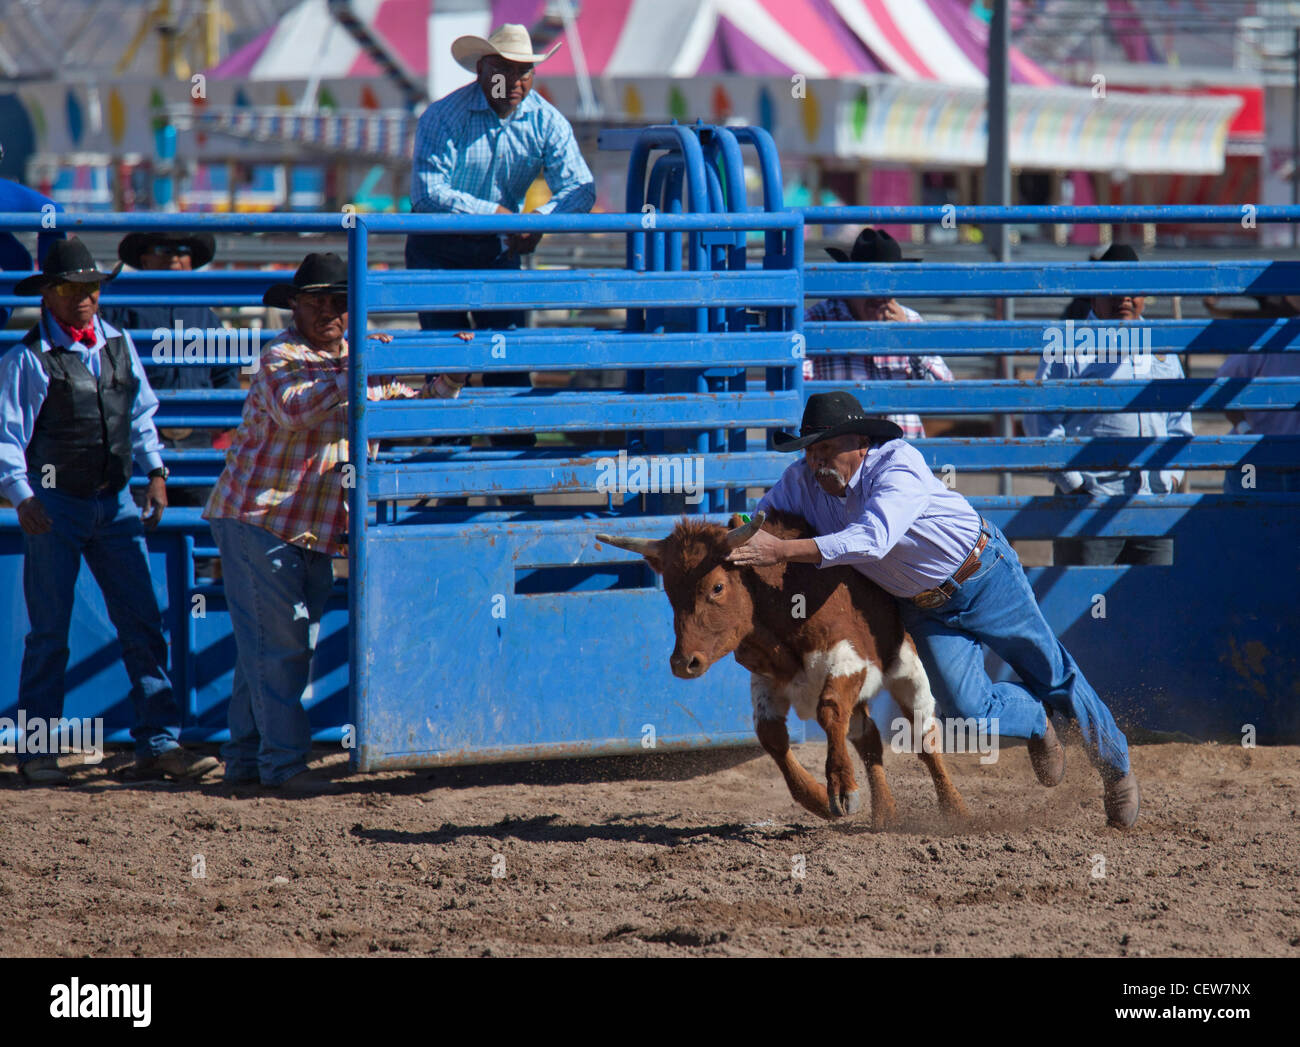 The chute dogging, or steer wrestling, event in the masters division (Age 40+) of the Tohono O'odham Nation All Indian Rodeo Stock Photo